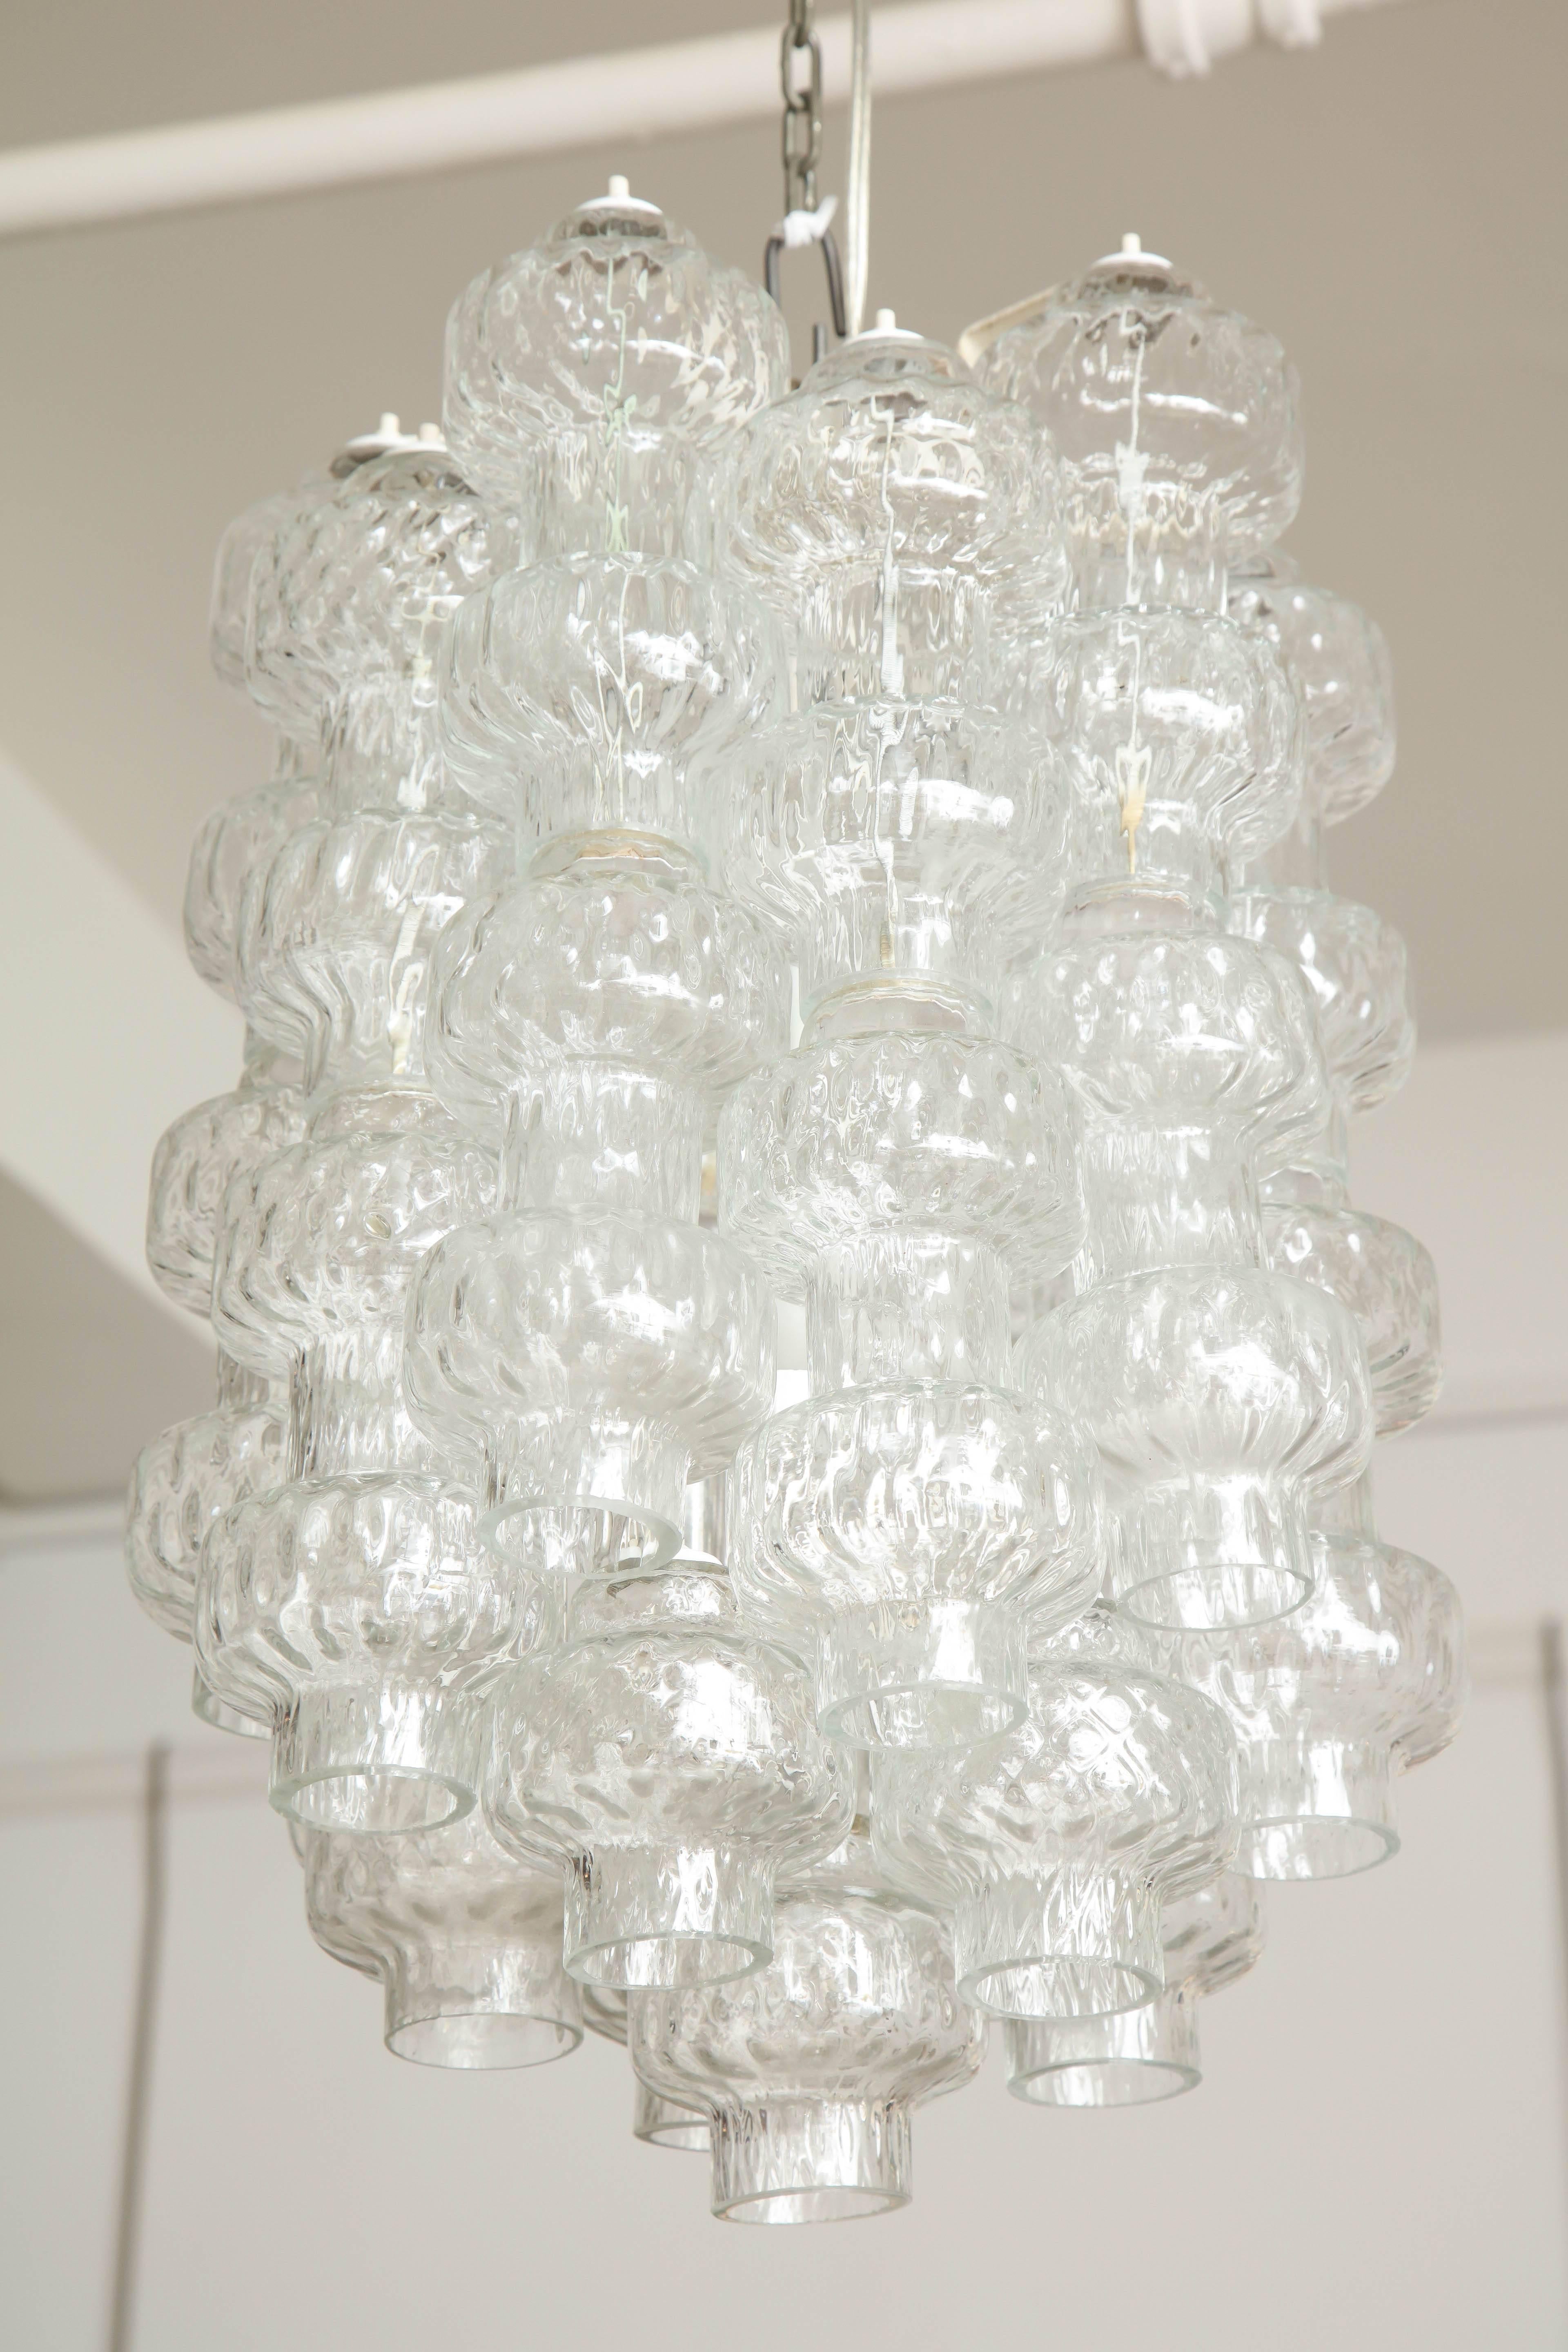 Venini chandelier made in Venice 1960, blown glass sphere's with a diamond pattern in the glass make up the over all design of each sphere, great quality, perfect to hang in a hall stairwell, takes six E14 bulbs.
 